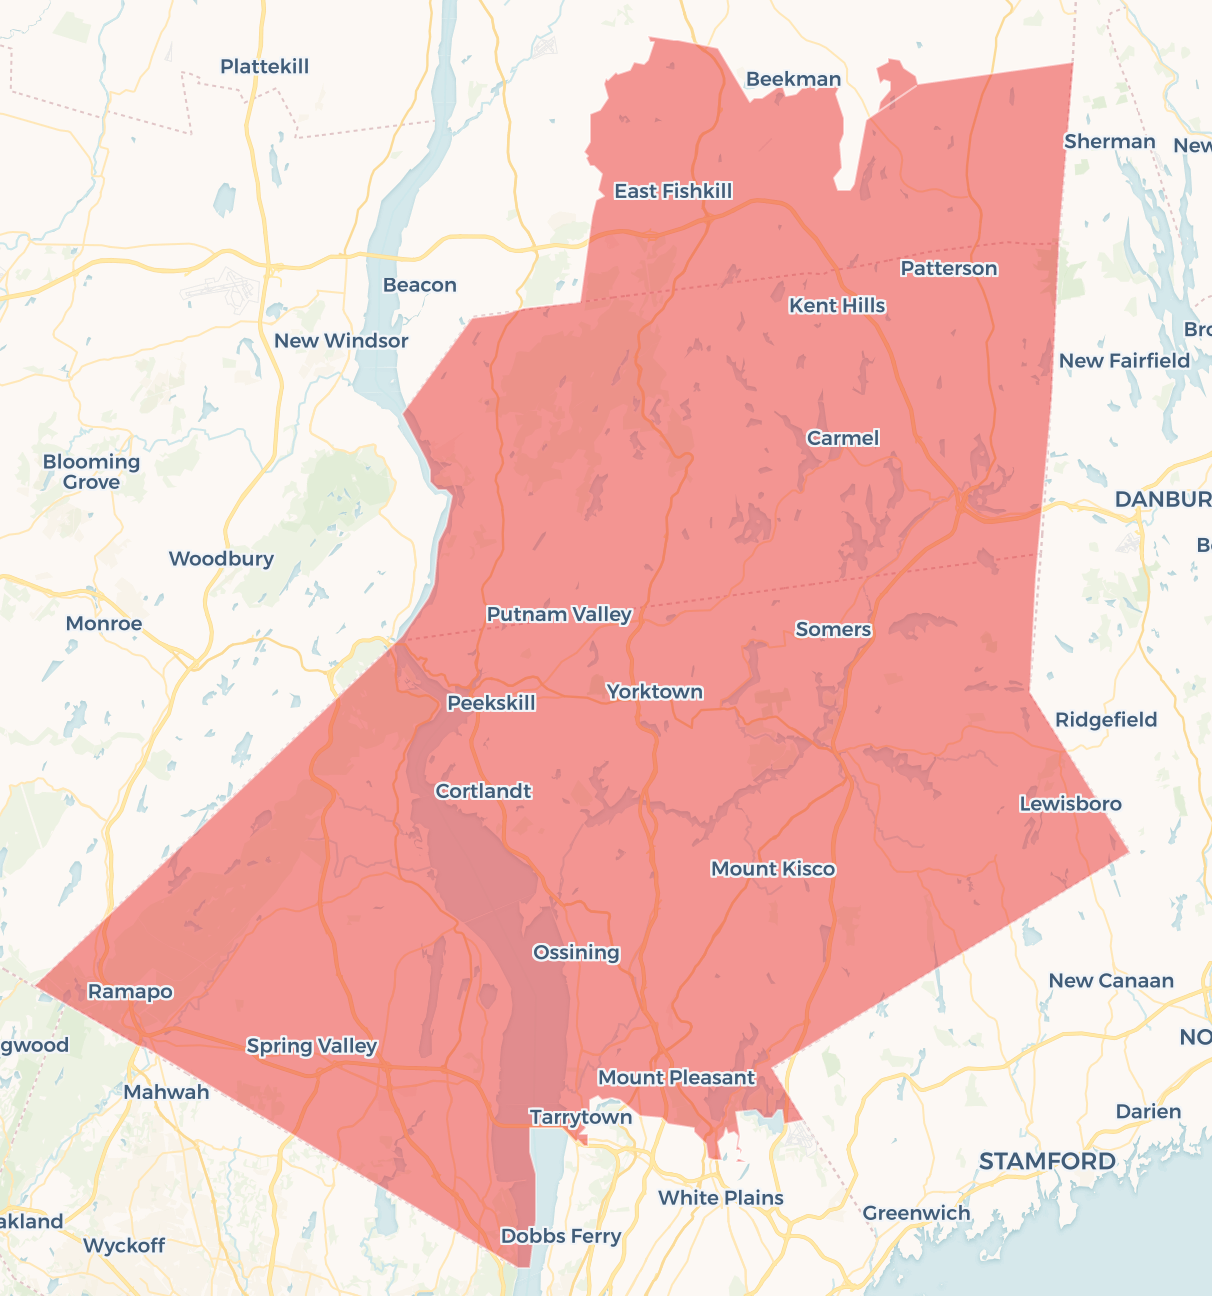 New York's 17th Congressional district as of 2022